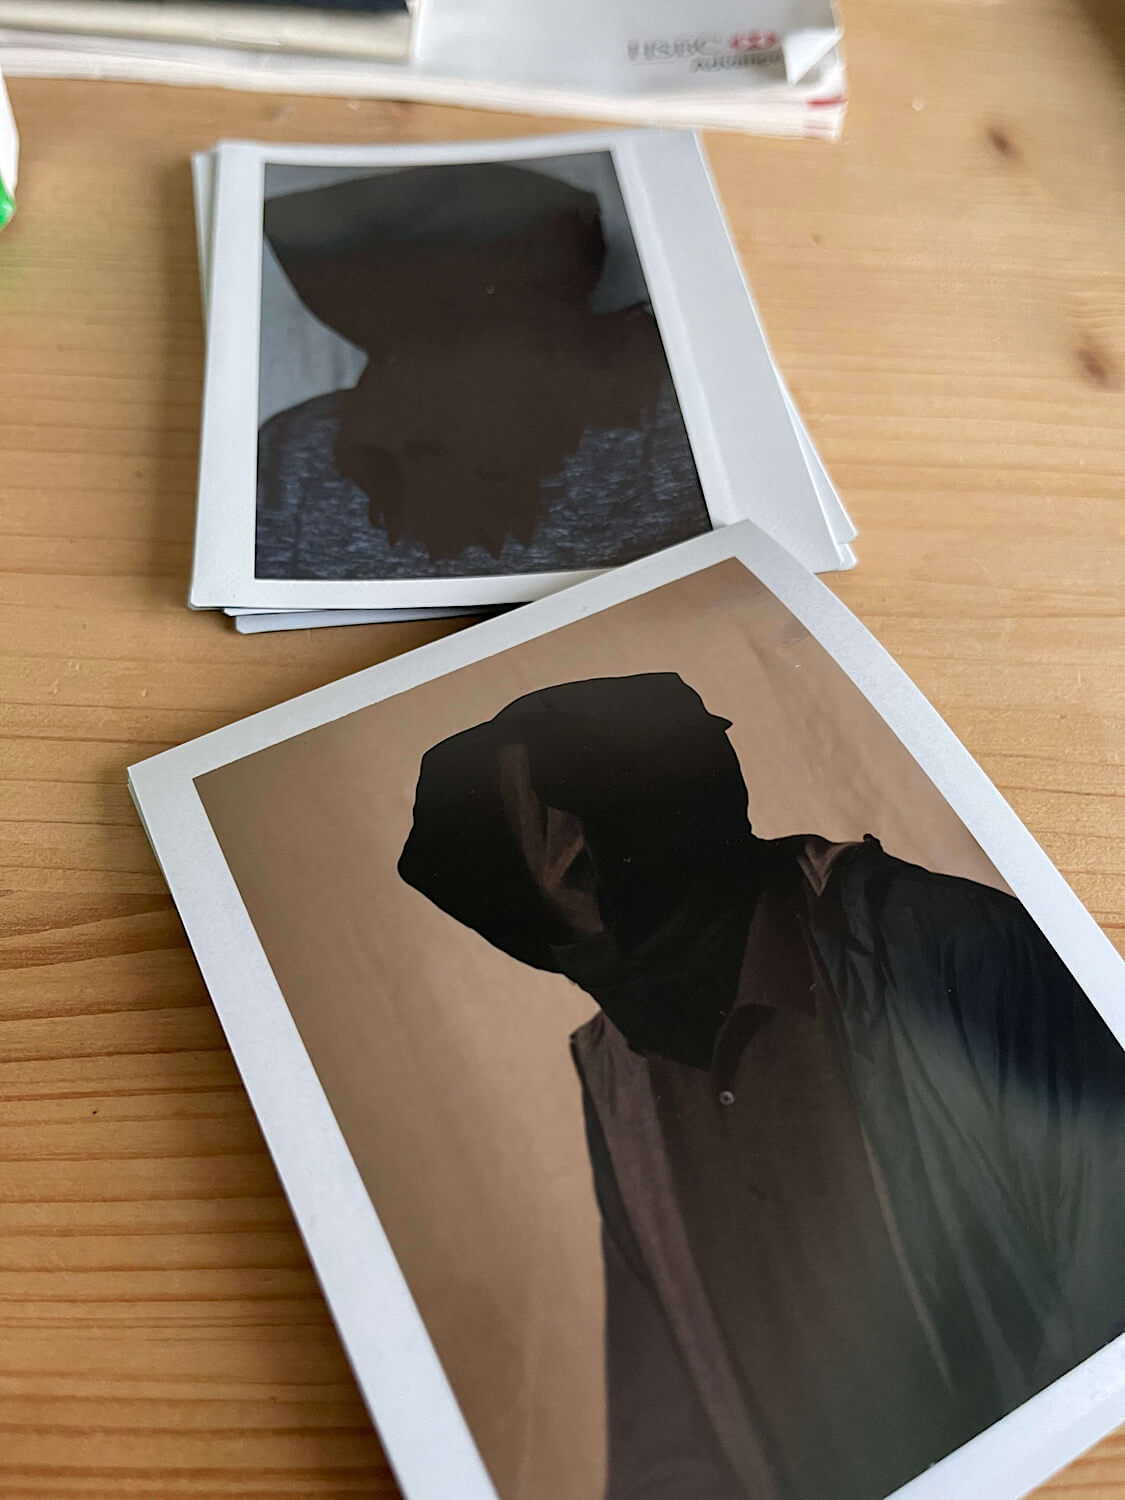 Portrait stack - Unidentified Black Male, or 8 out of 10 frames… Creating a small body of personal portraiture on Fuji FP-100c instant film with a Graflex Crown Graphic